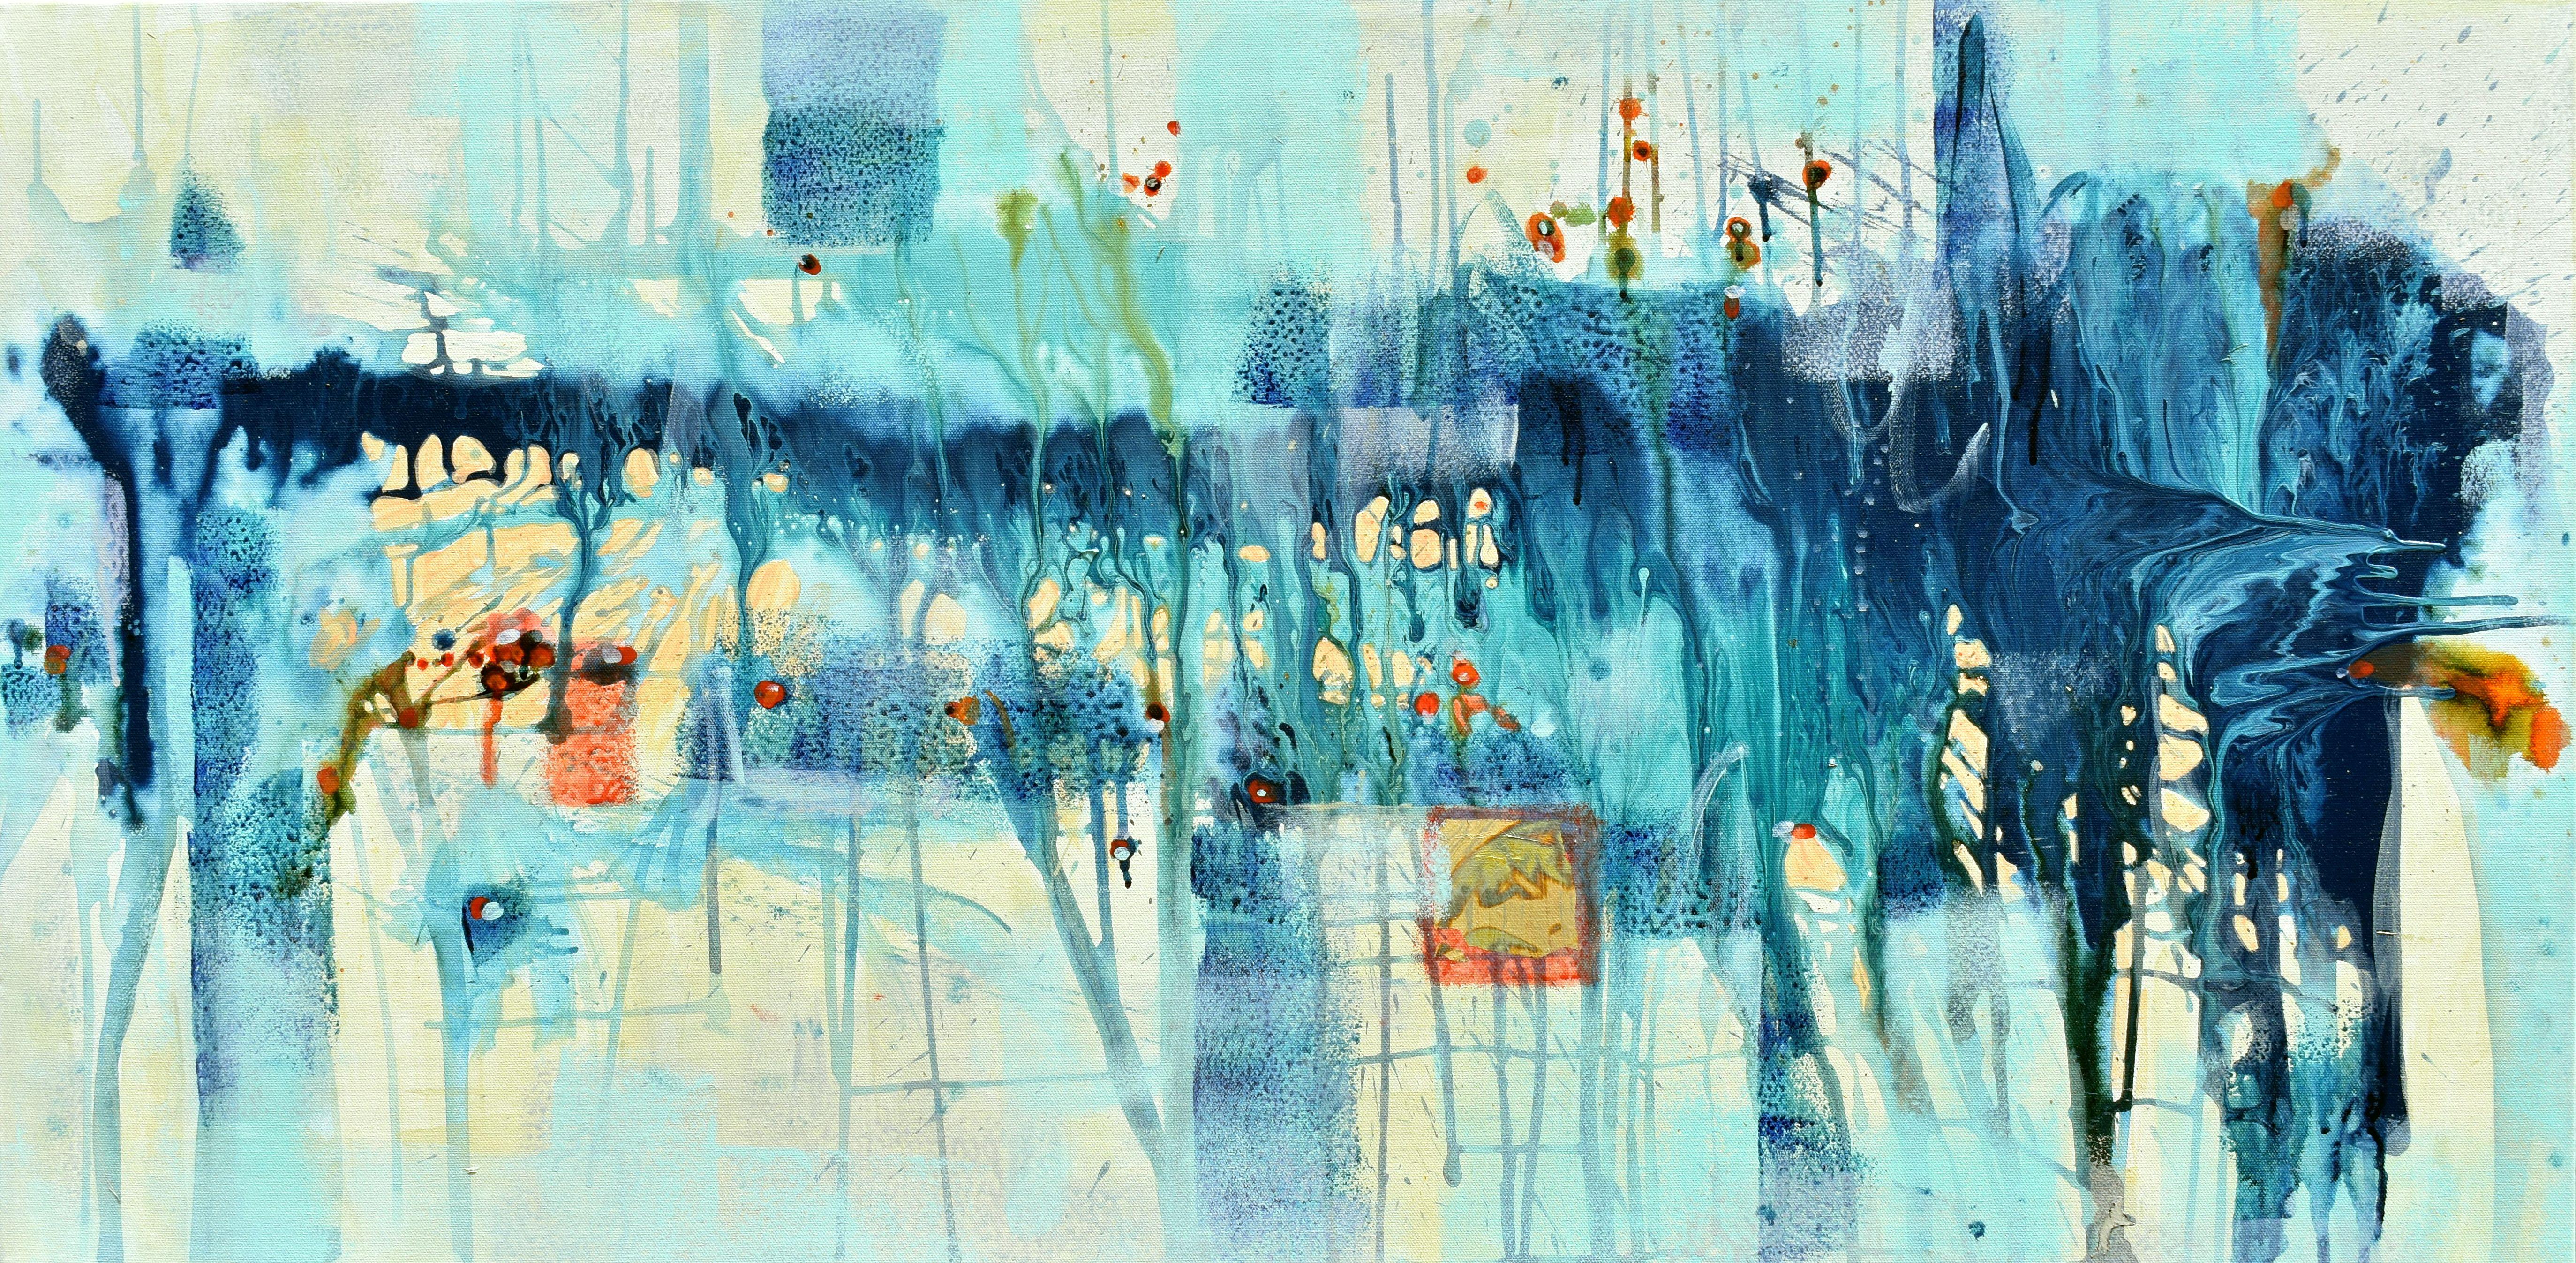 <p>Artist Comments<br>Varying blues and teals, accented with orange geometric shapes, evoke the expansive feeling of an open landscape. The piece illustrates transcending limitations or obstacles, conveying the dawning realization that nothing is